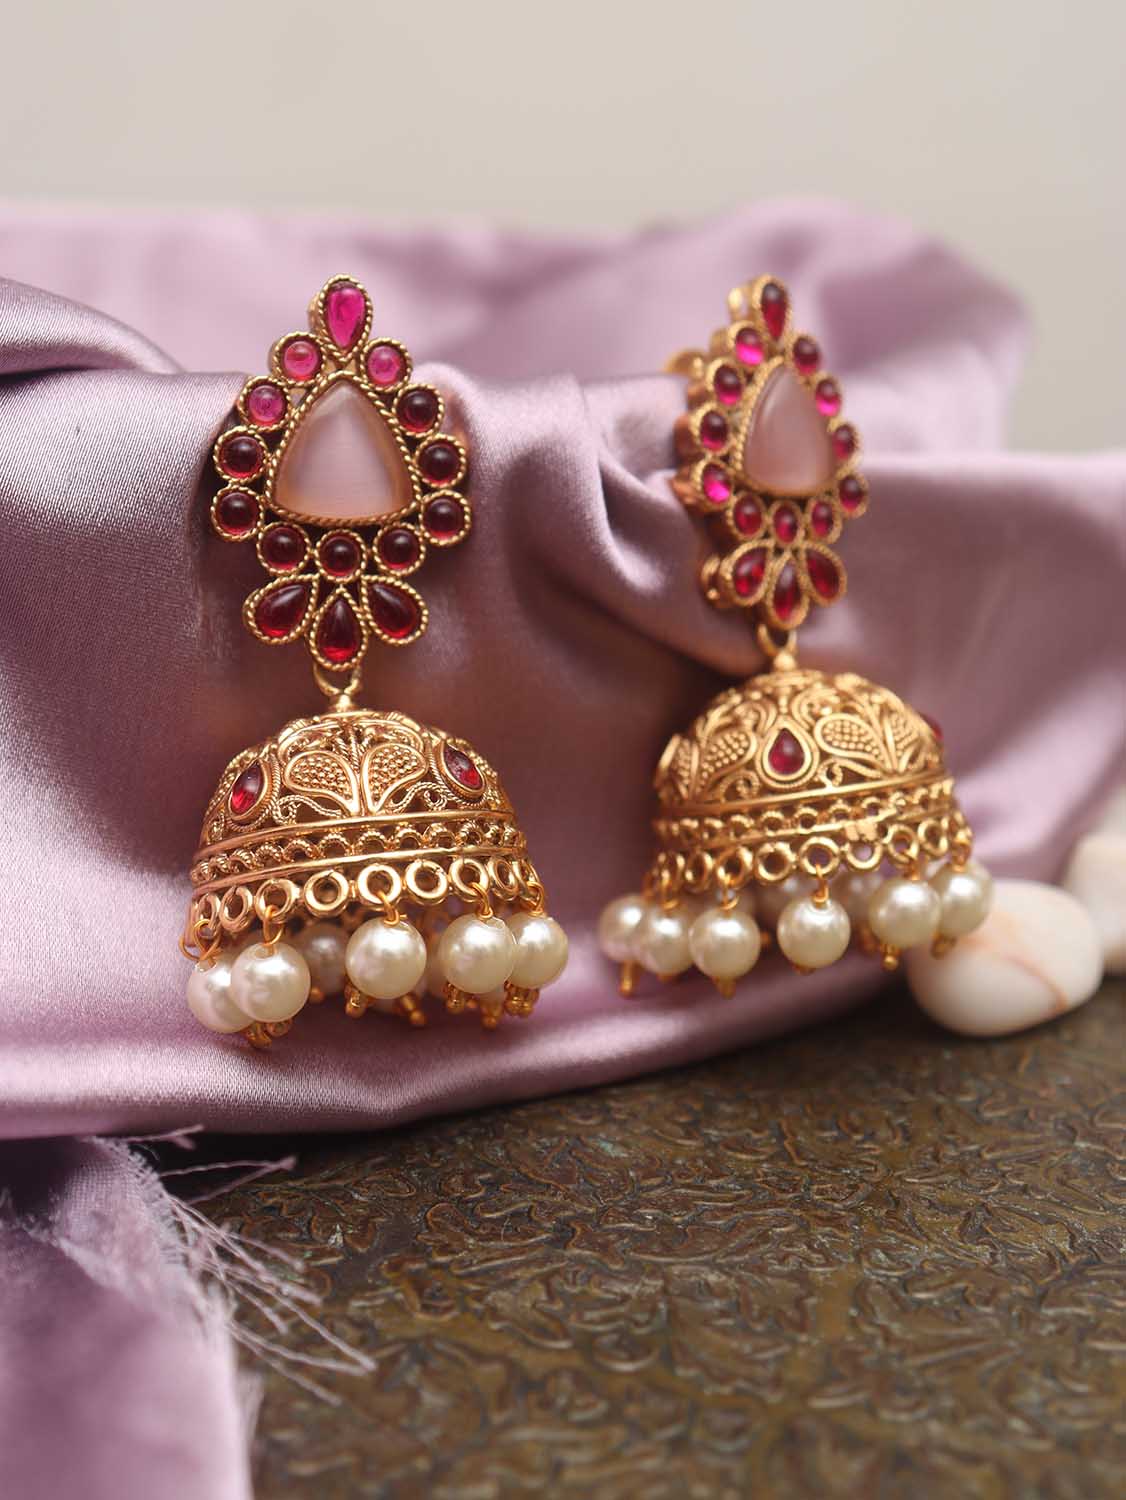 Golden Grace Earrings - Elevate Your Style with our Exclusive Designs - Lightweight and Trendy for Any Occasion. - Luxurion World